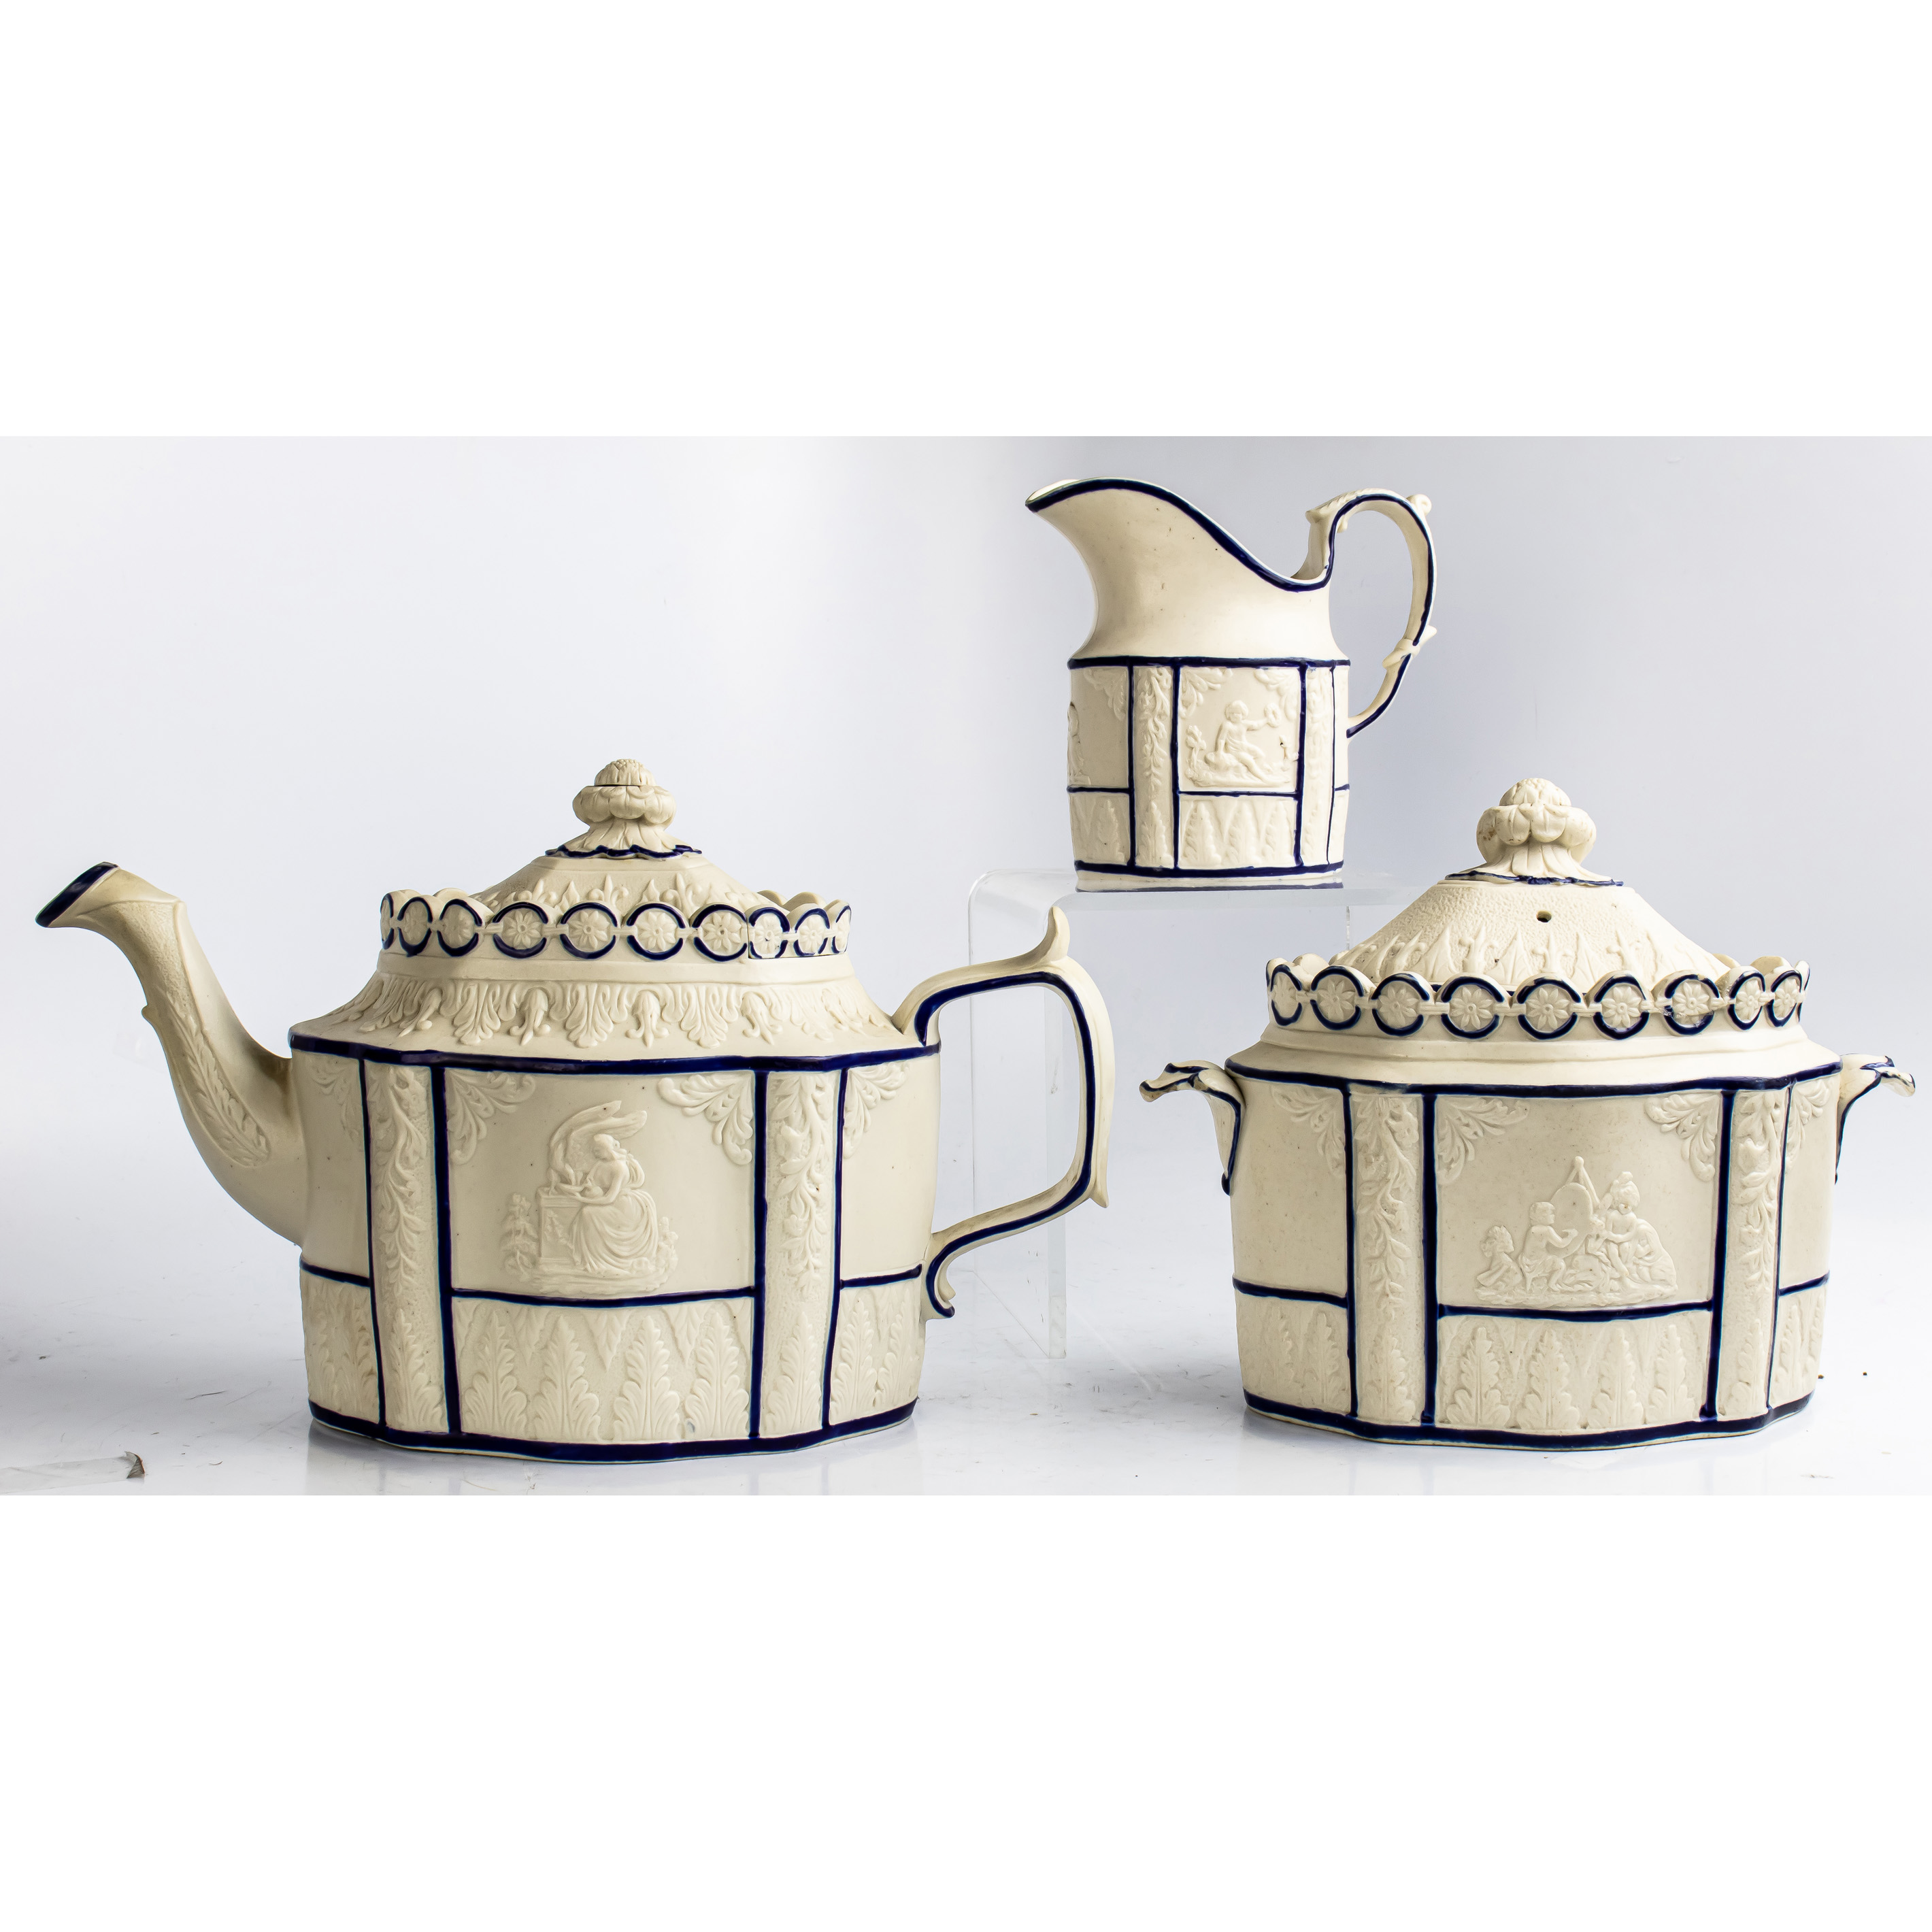 A ENGLISH CREAMWARE TEASET DECORATED 3a364d